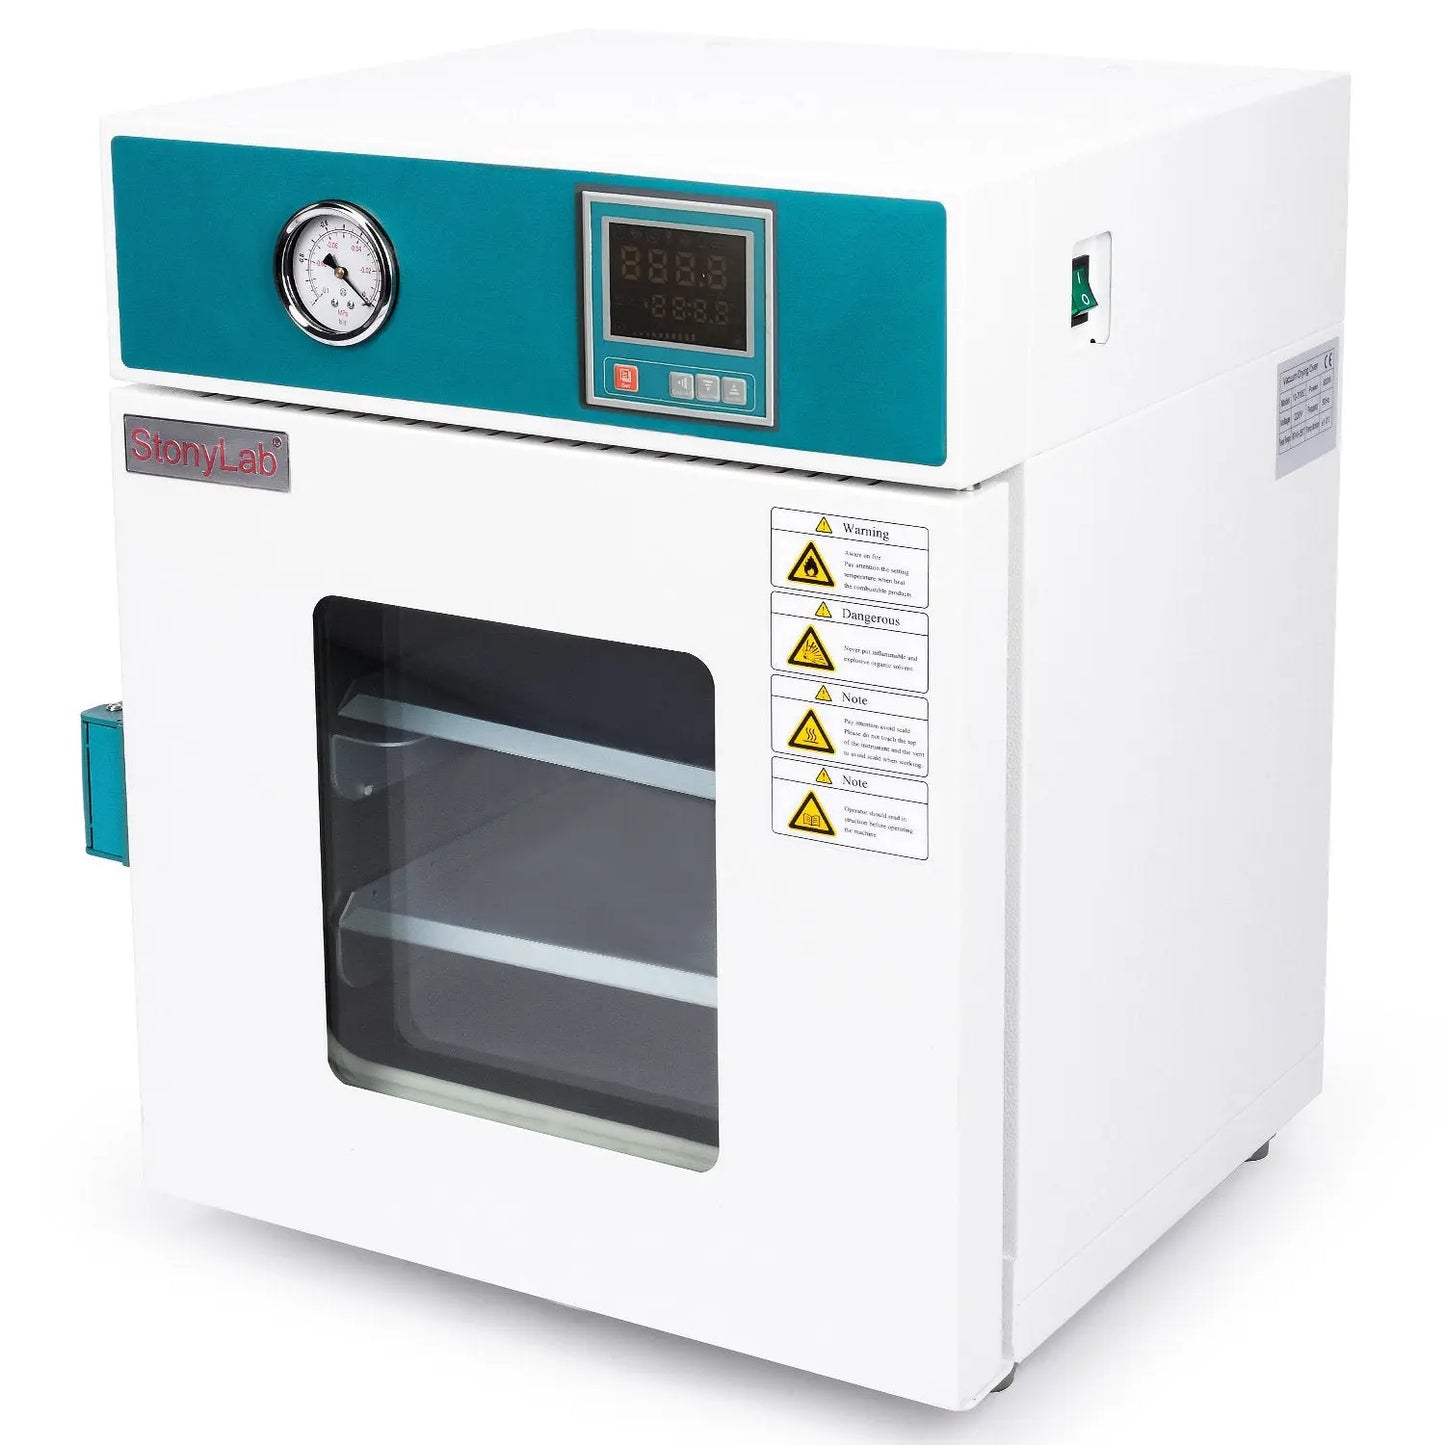 Vacuum Drying Oven with Vacuum Gauge and Digital Controller, 24L/0.9 cu ft Ovens